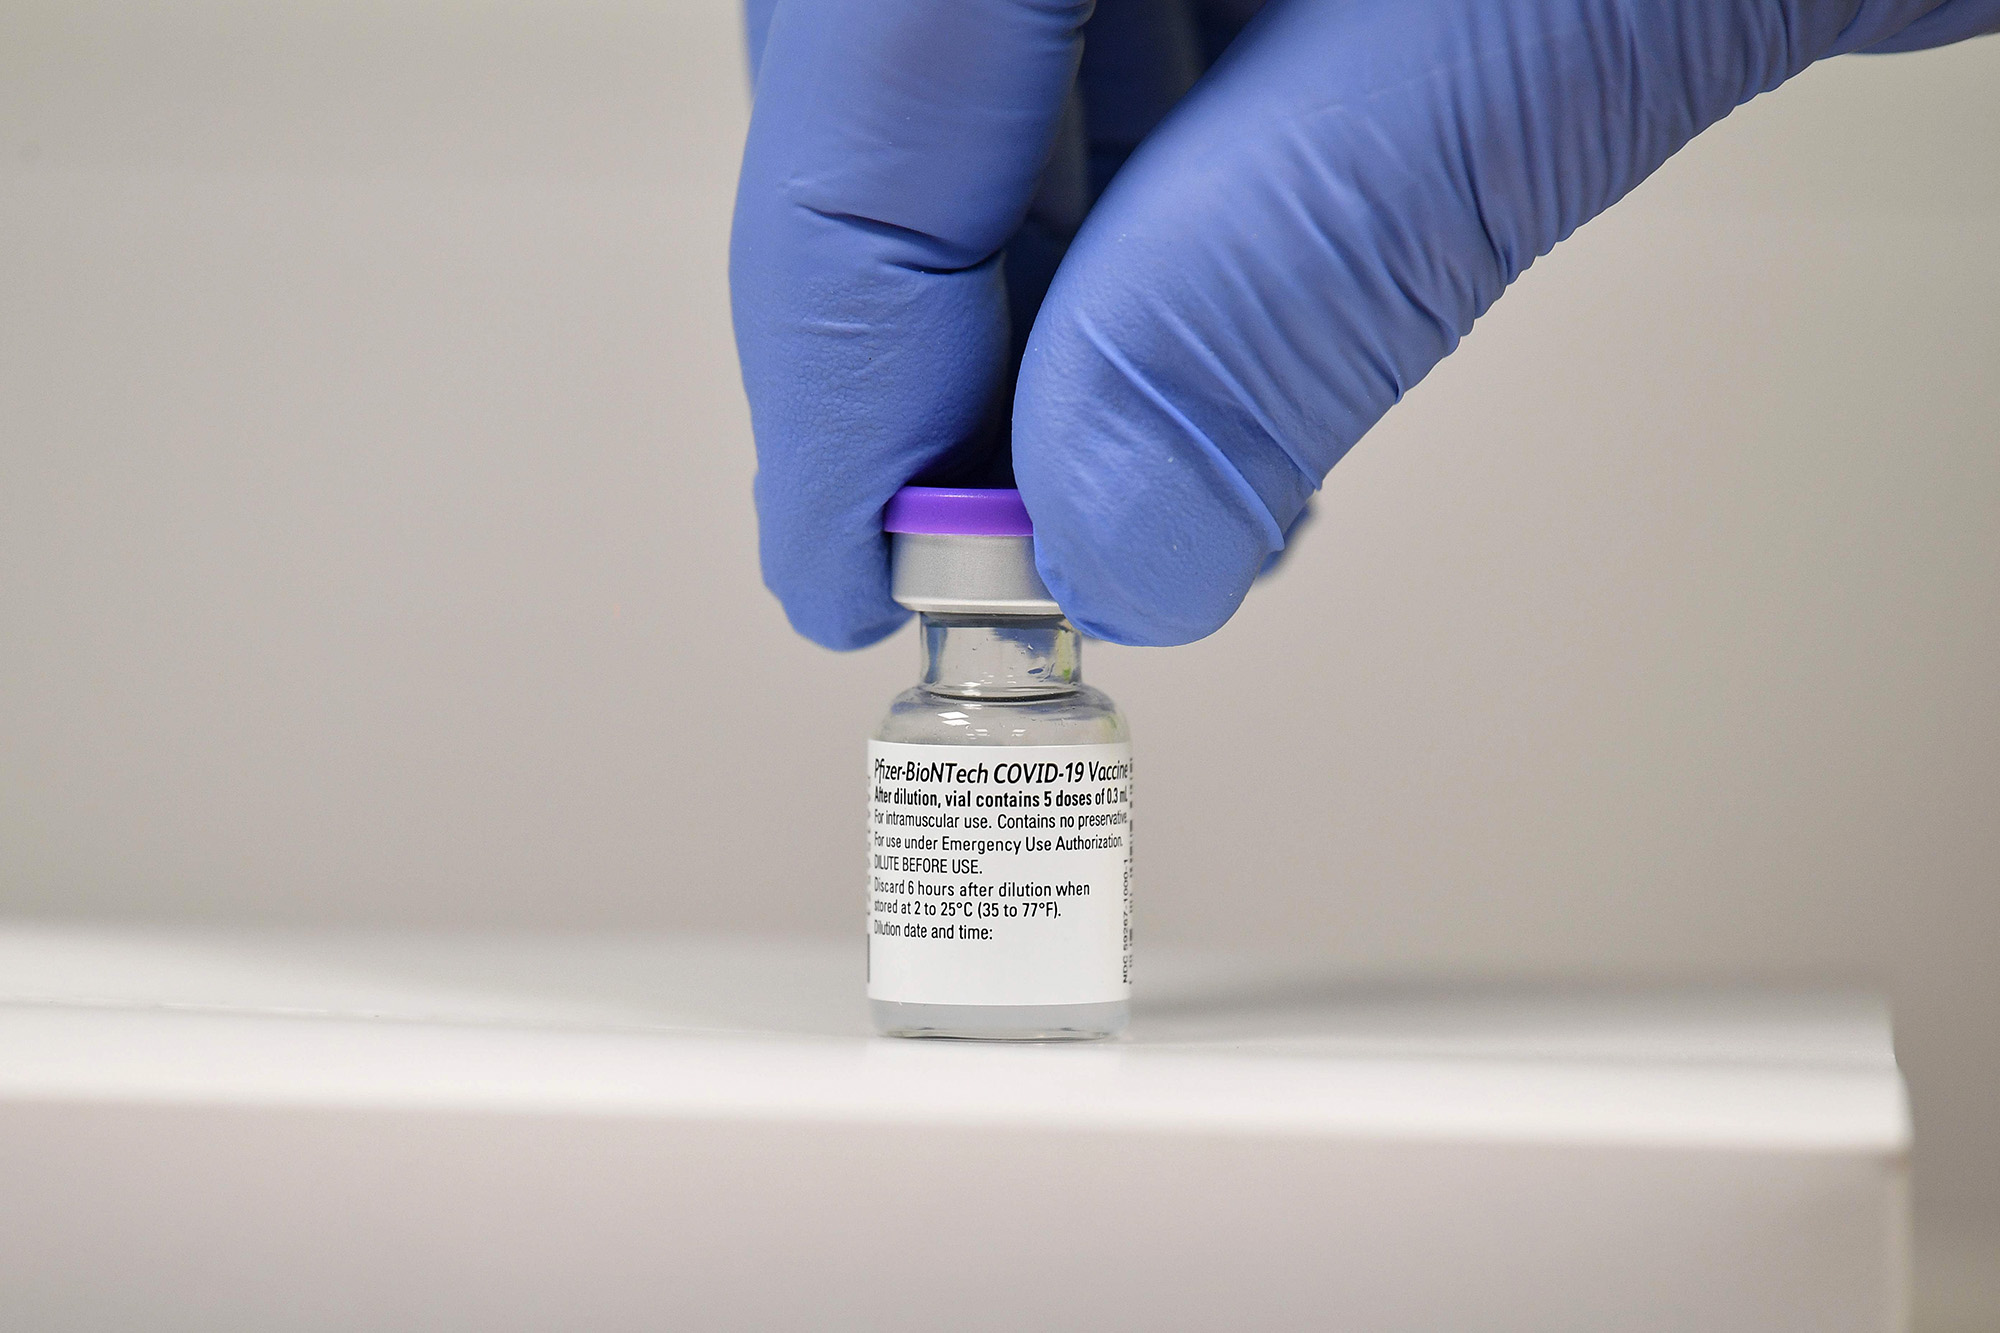 PHOTO: A member of staff adjusts a vial of Pfizer-BioNTech Covid-19 vaccine at a vaccination health centre in Cardiff, South Wales, Dec. 8, 2020.